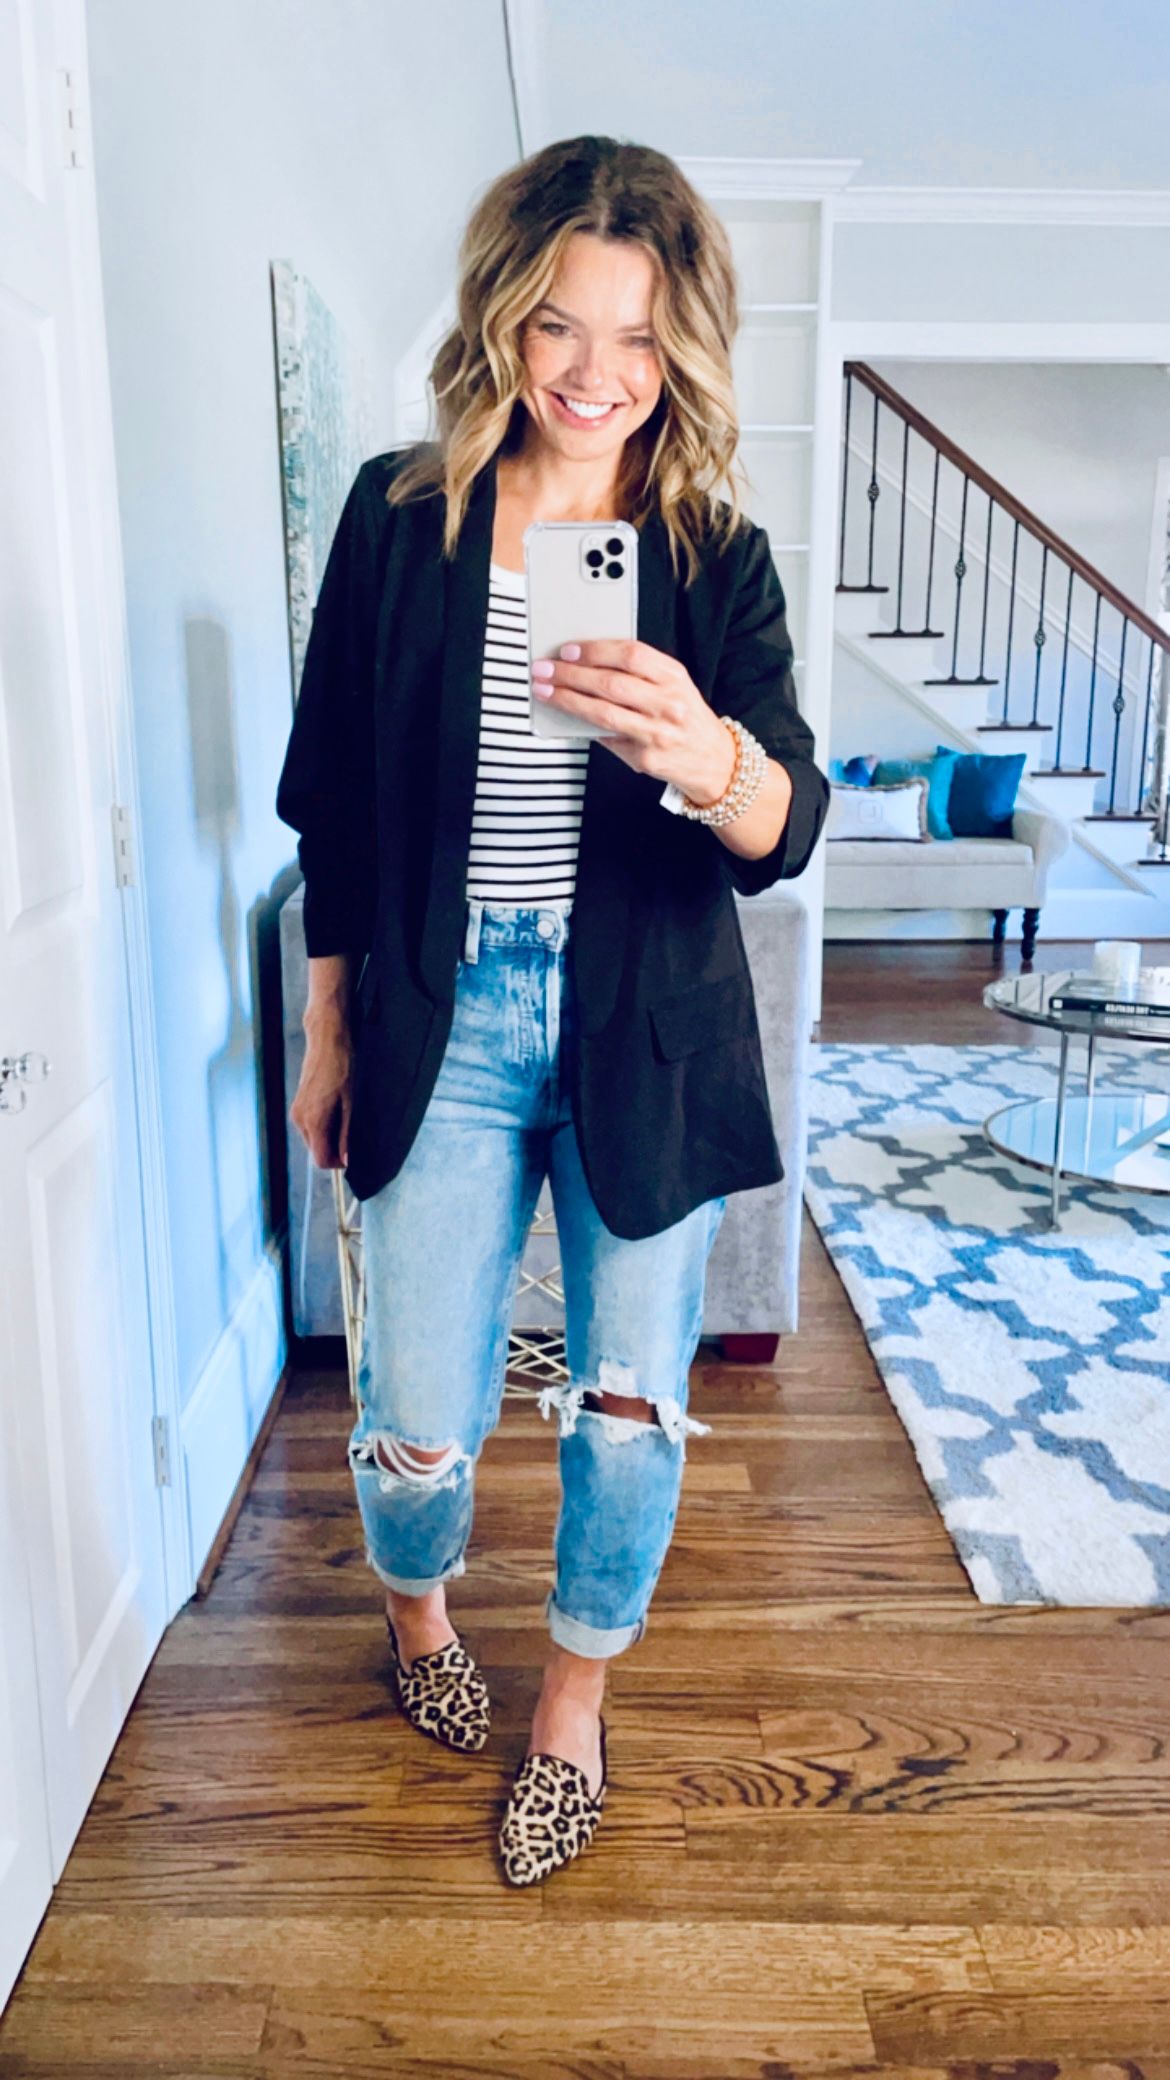 Smiling woman taking a full body selfie while wearing a black blazer, black and white stripe shirt, denim ripped jeans, and animal flats